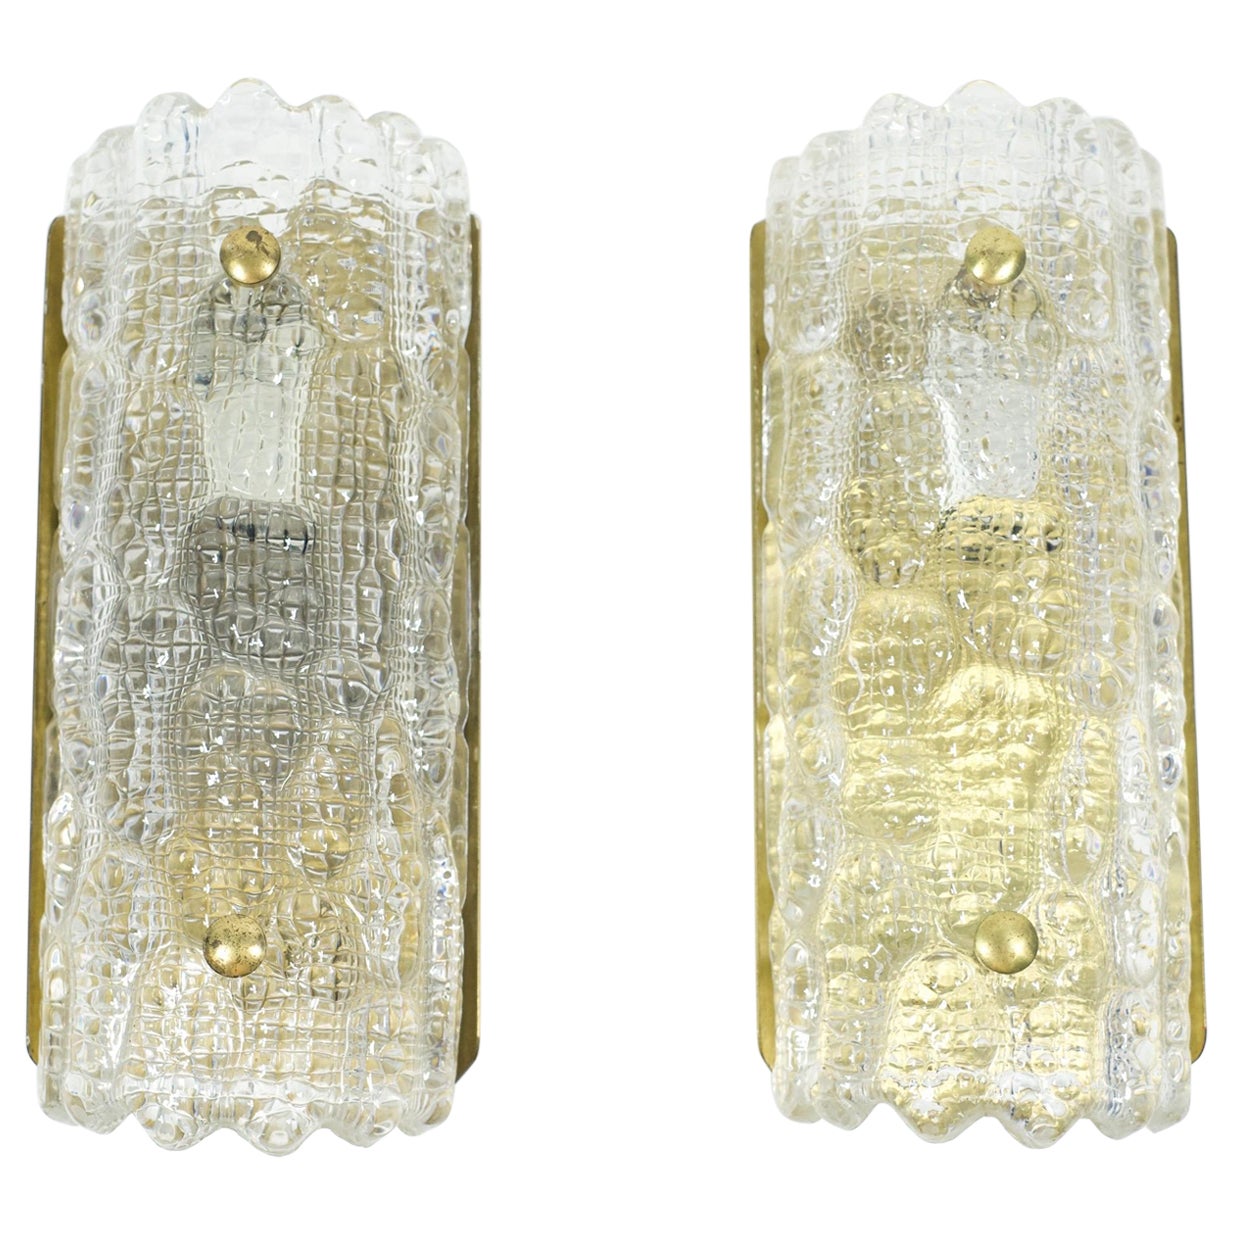 Pair of Orrefors Sconces Brass and Crystal Glass Shades by Orrefors Sweden, 1970 For Sale